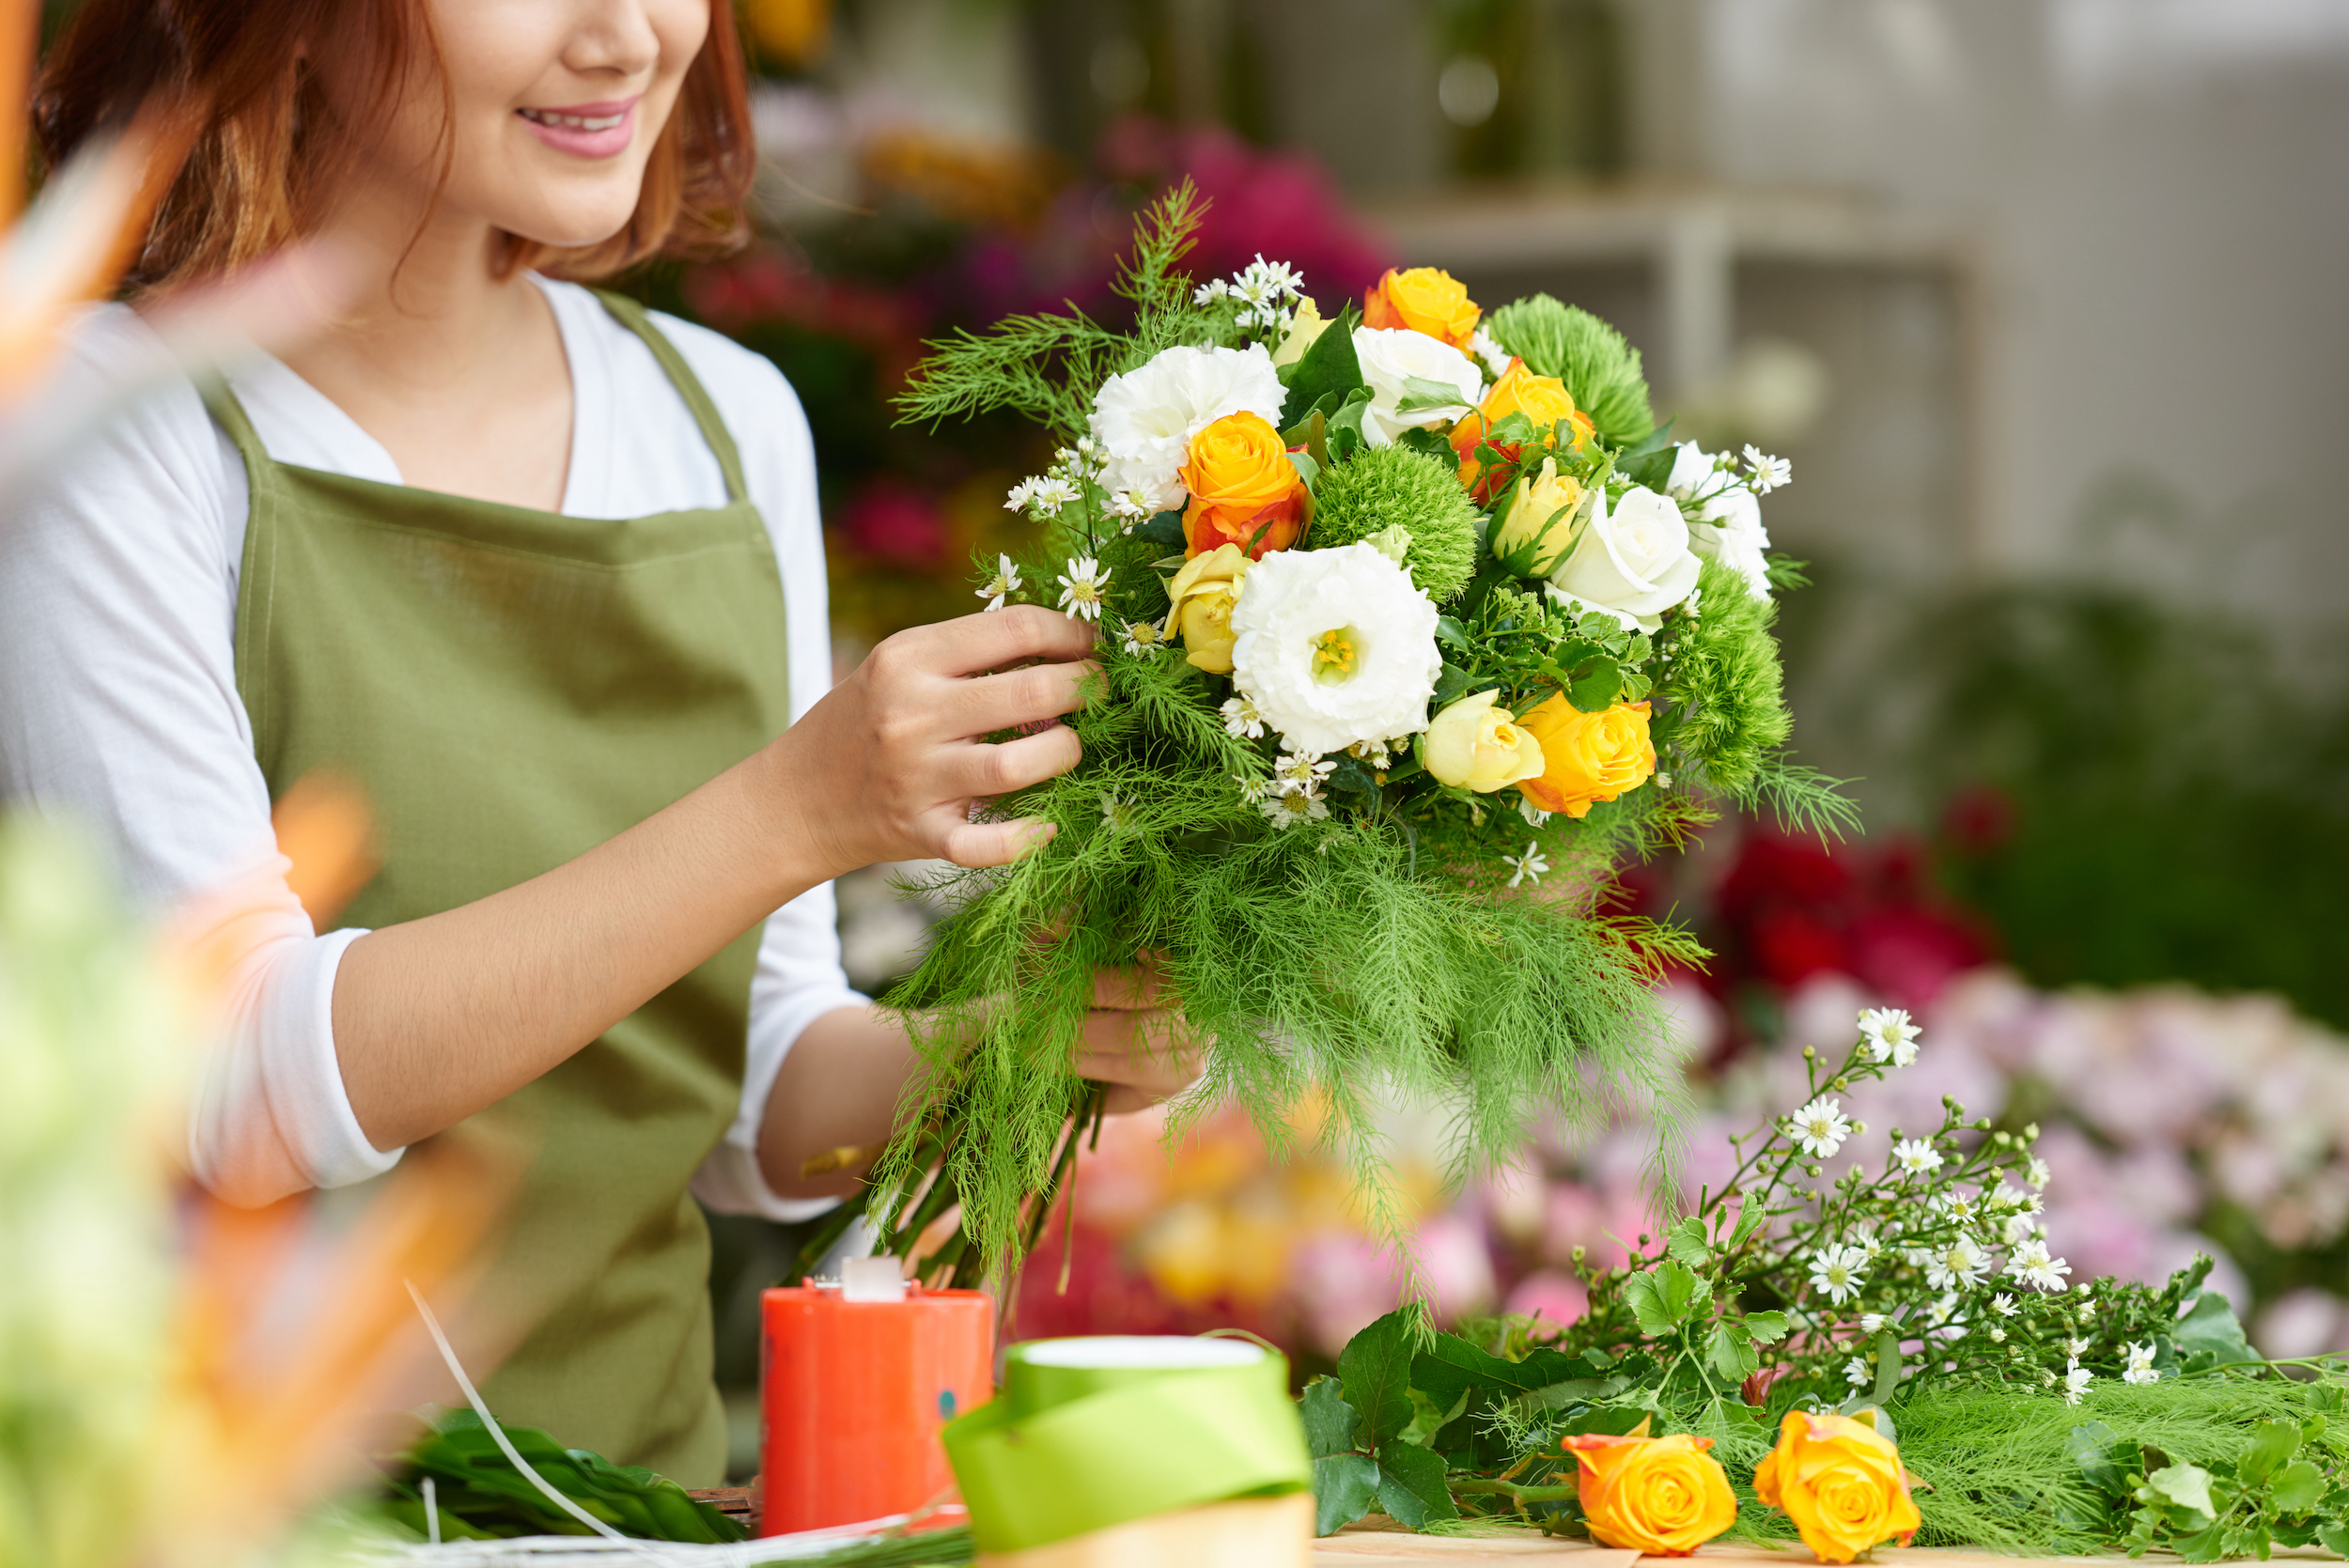 Woman making a bouquet with ferns, white and orange flowers